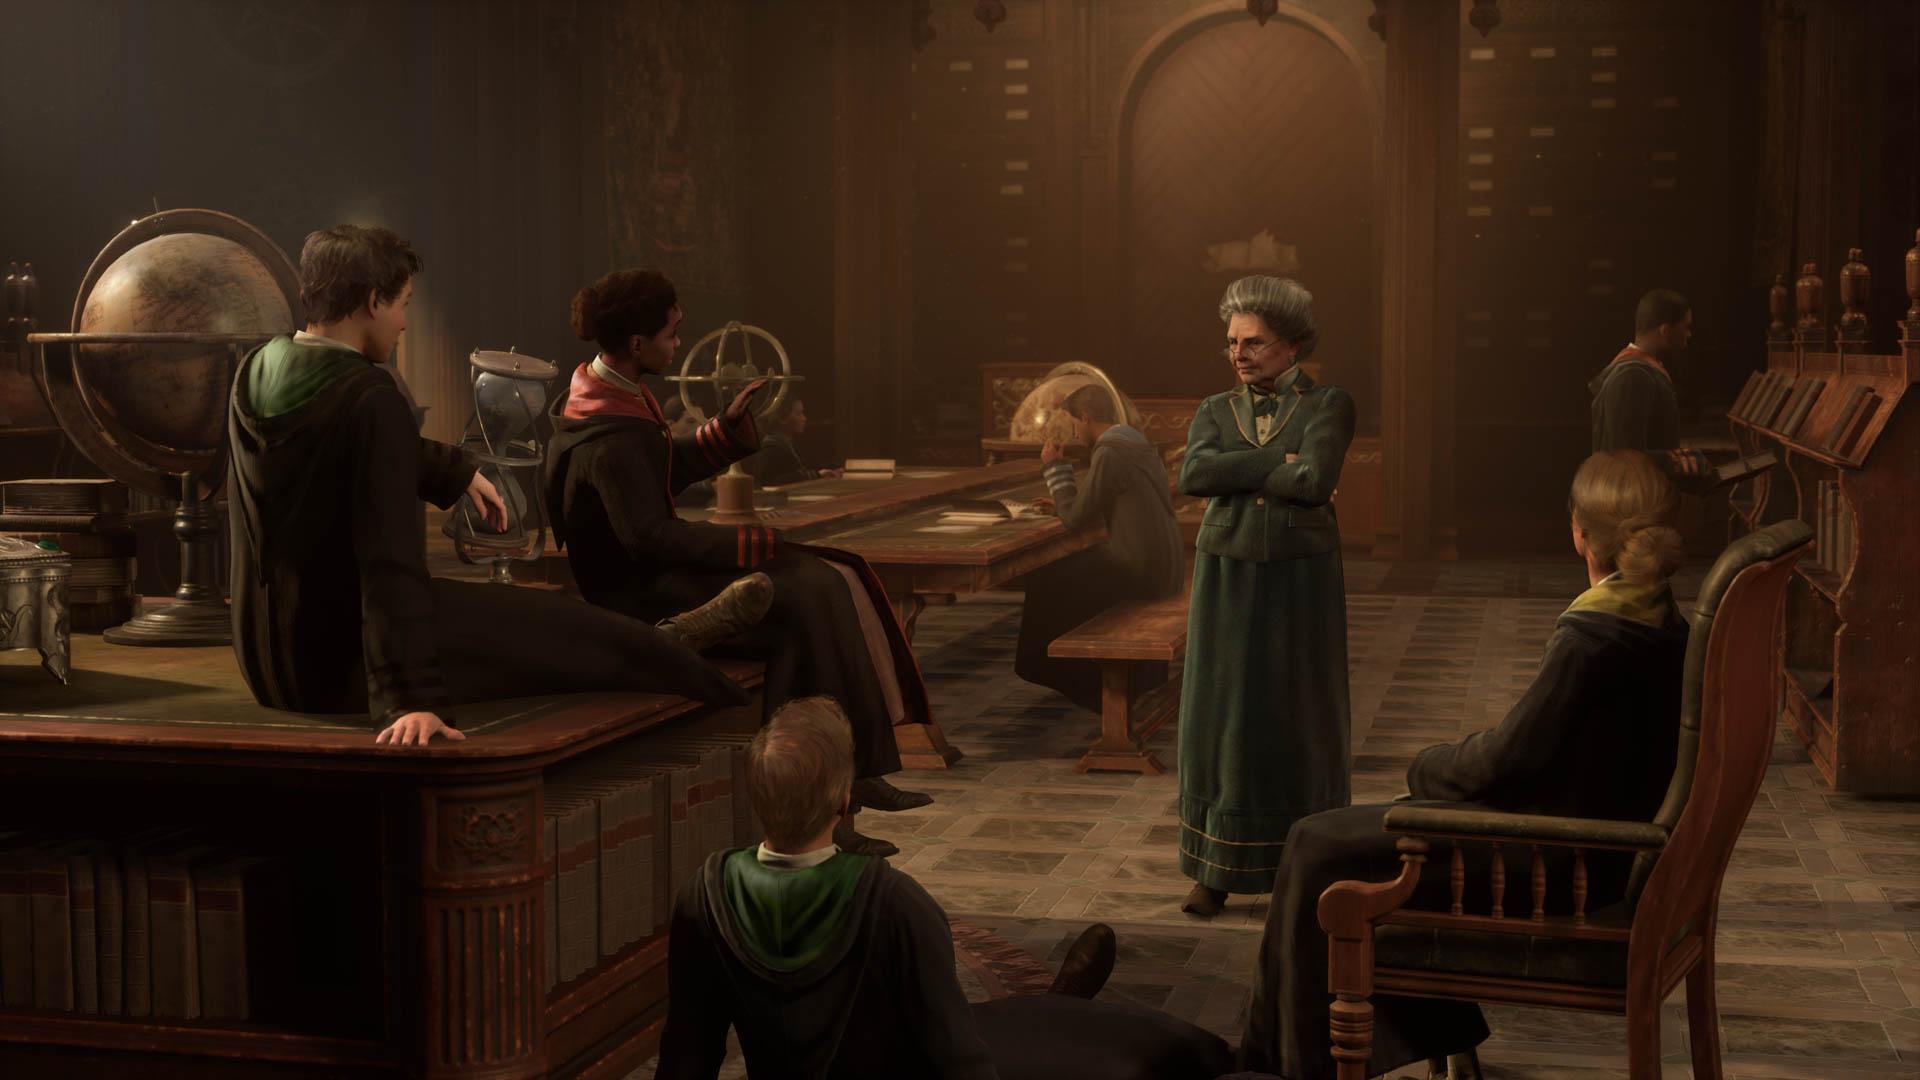 2023 Preview: Hogwarts Legacy could be the Harry Potter game fans have  waited 20 years for